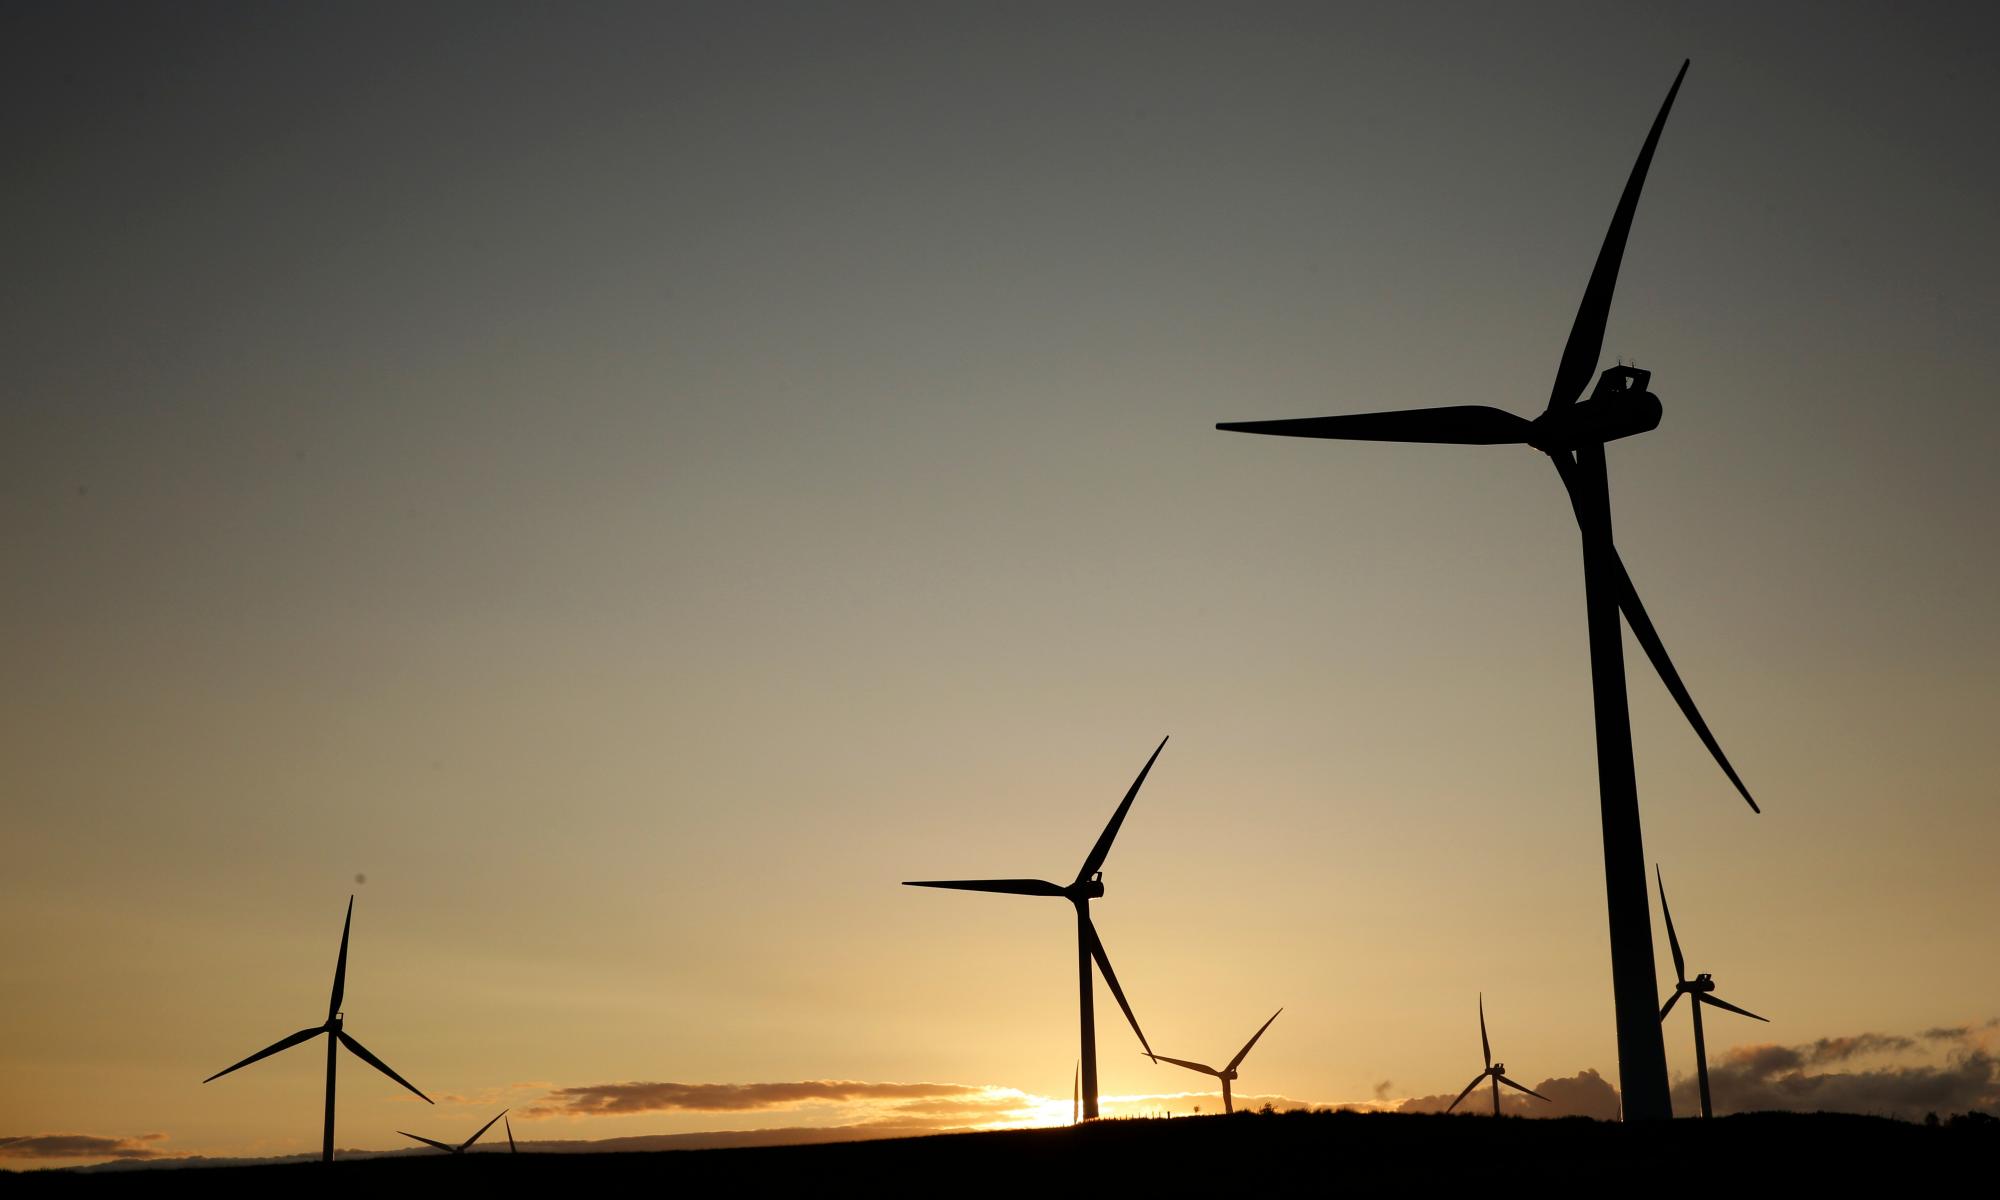 Just one new onshore windfarm started under current UK policies in 2019